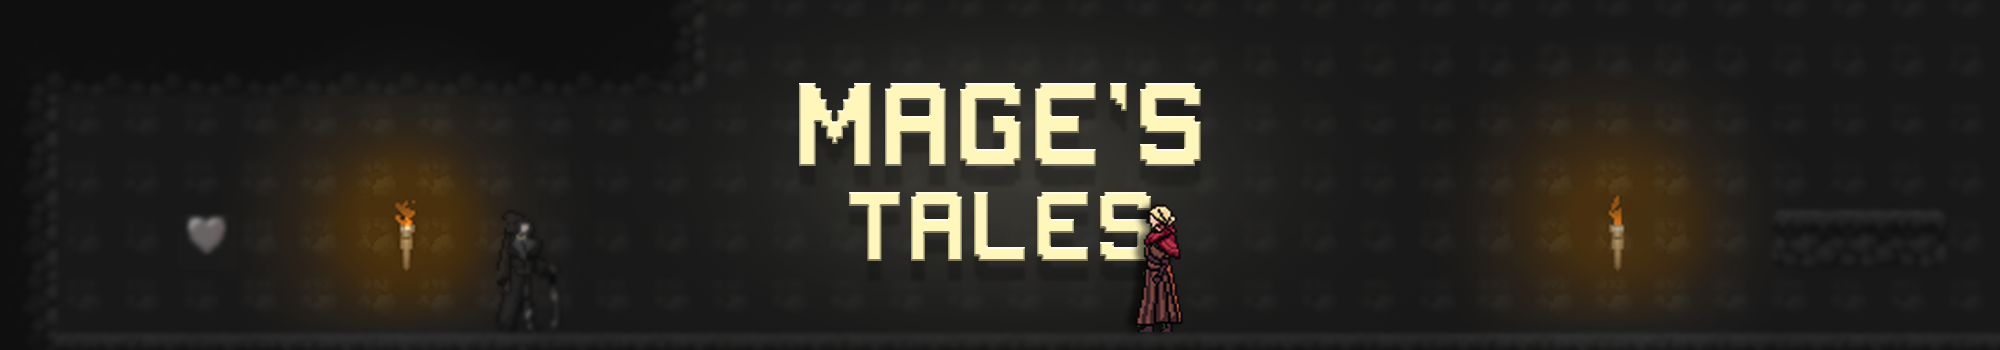 Mage's Tales